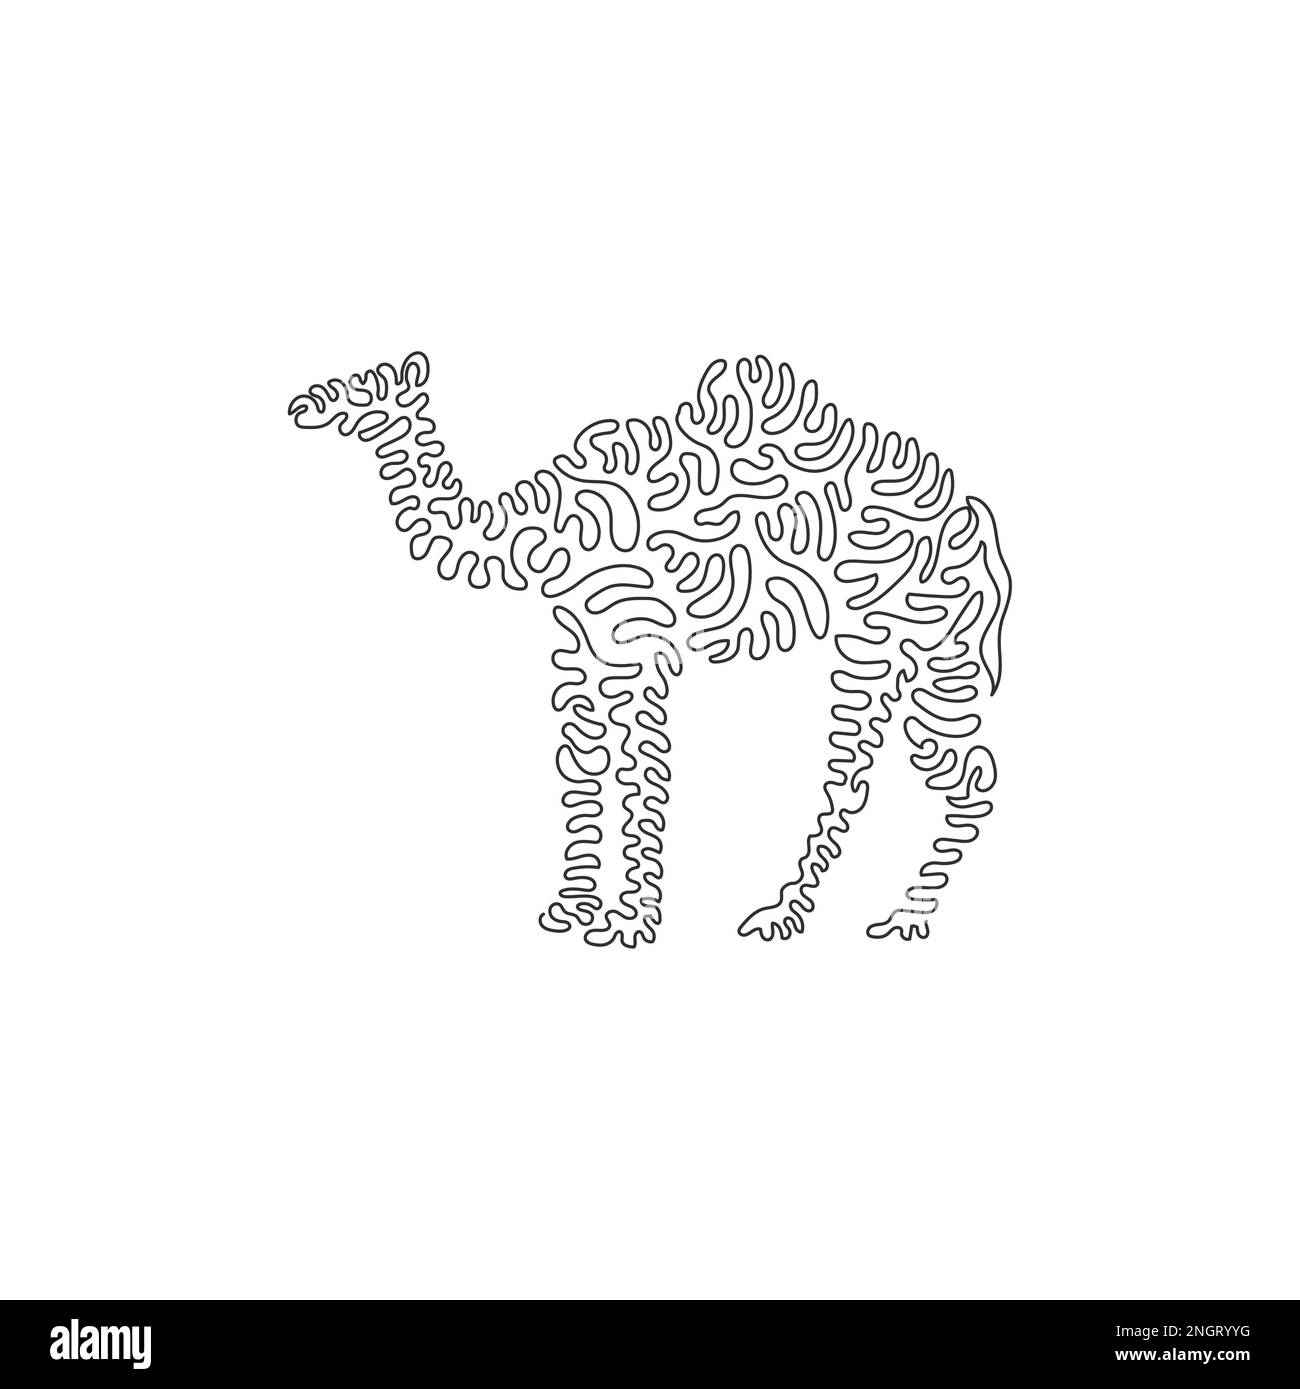 Single one line drawing of adorable camel with long legs abstract art. Continuous line drawing graphic design vector illustration of friendly camel Stock Vector